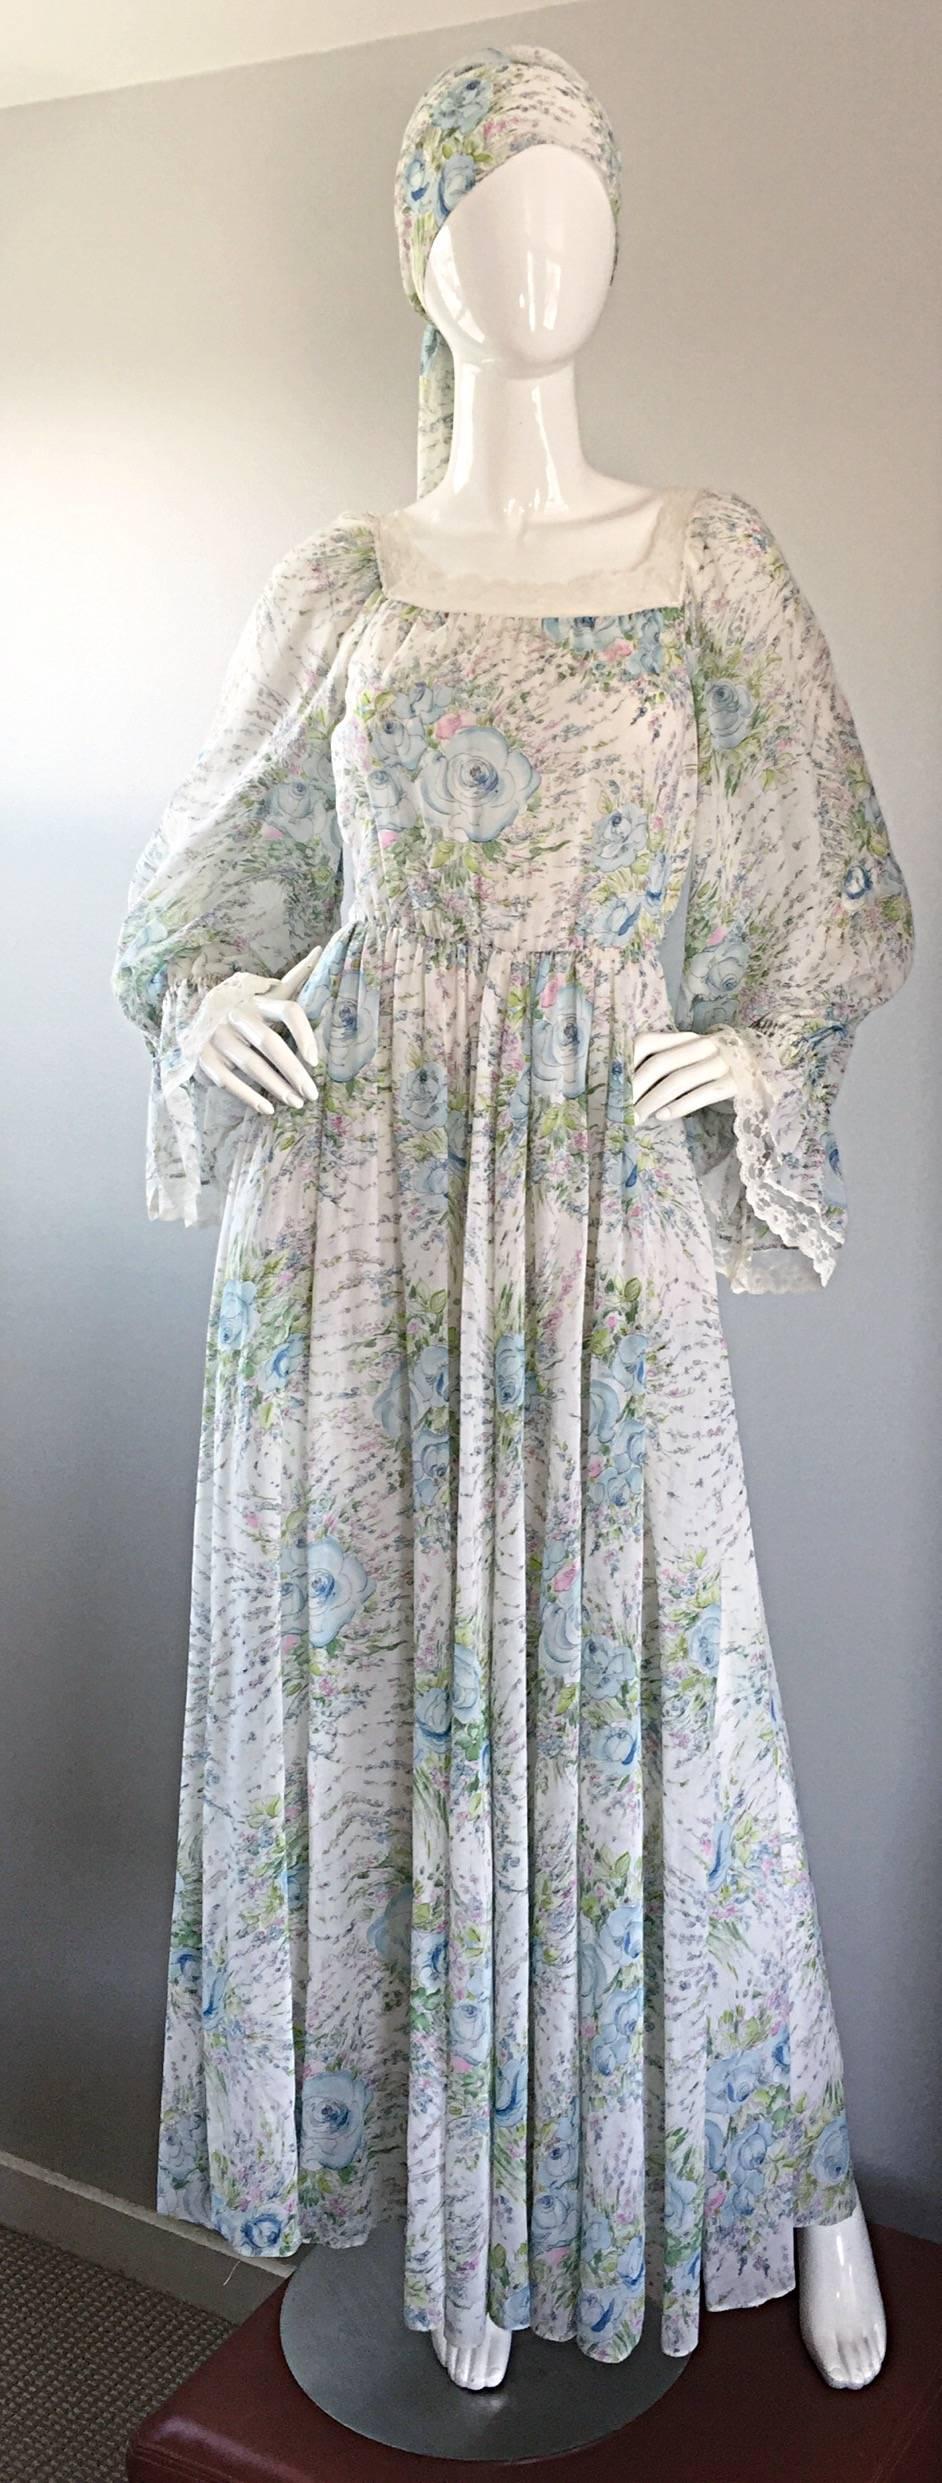 Absolutely breathtaking vintage 70s OSCAR DE LA RENTA for Neiman Marcus ivory flower screen printed boho maxi dress and head scarf / belt! I don't even know where to start with describing this masterpiece...quite possibly my favorite Oscar piece